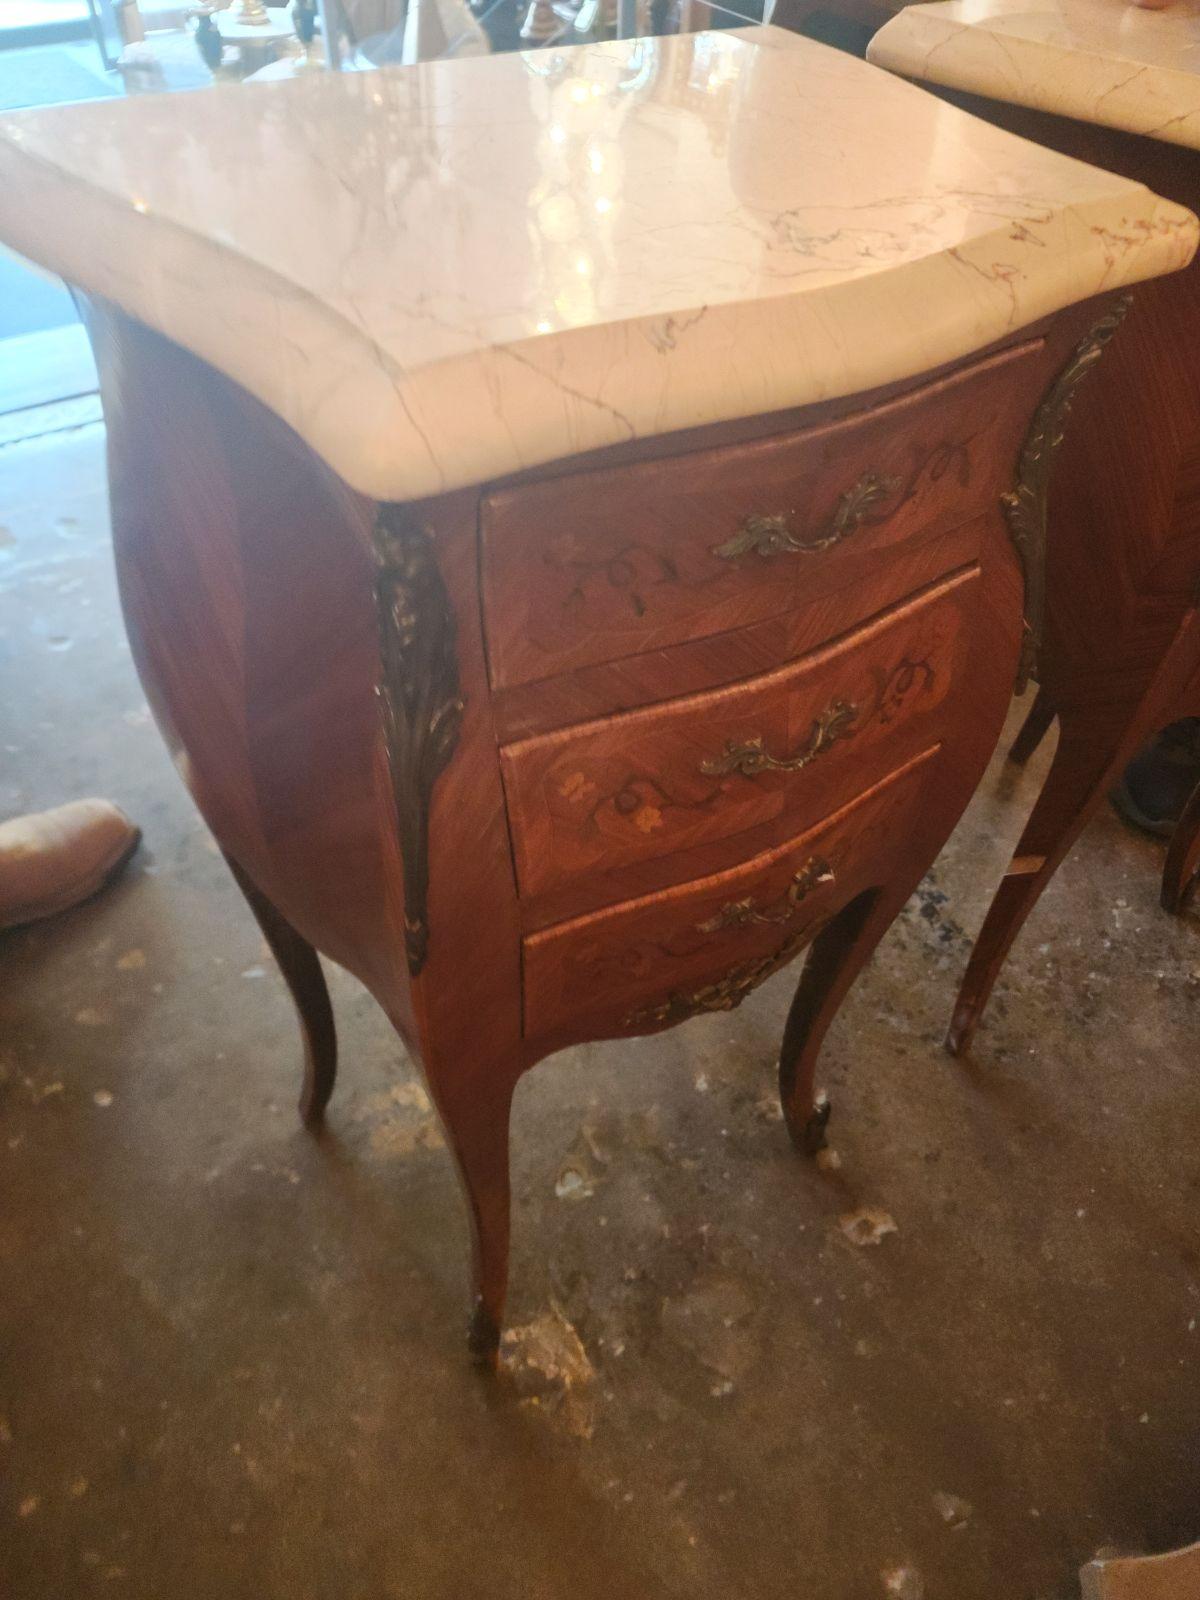 Pair Of French Louis XV Style Beige Marble Top Night Stands Beautiful Shape With Molded Edges, Gilt Metal Mounts, And Elegant Legs With French Bracket Feet.